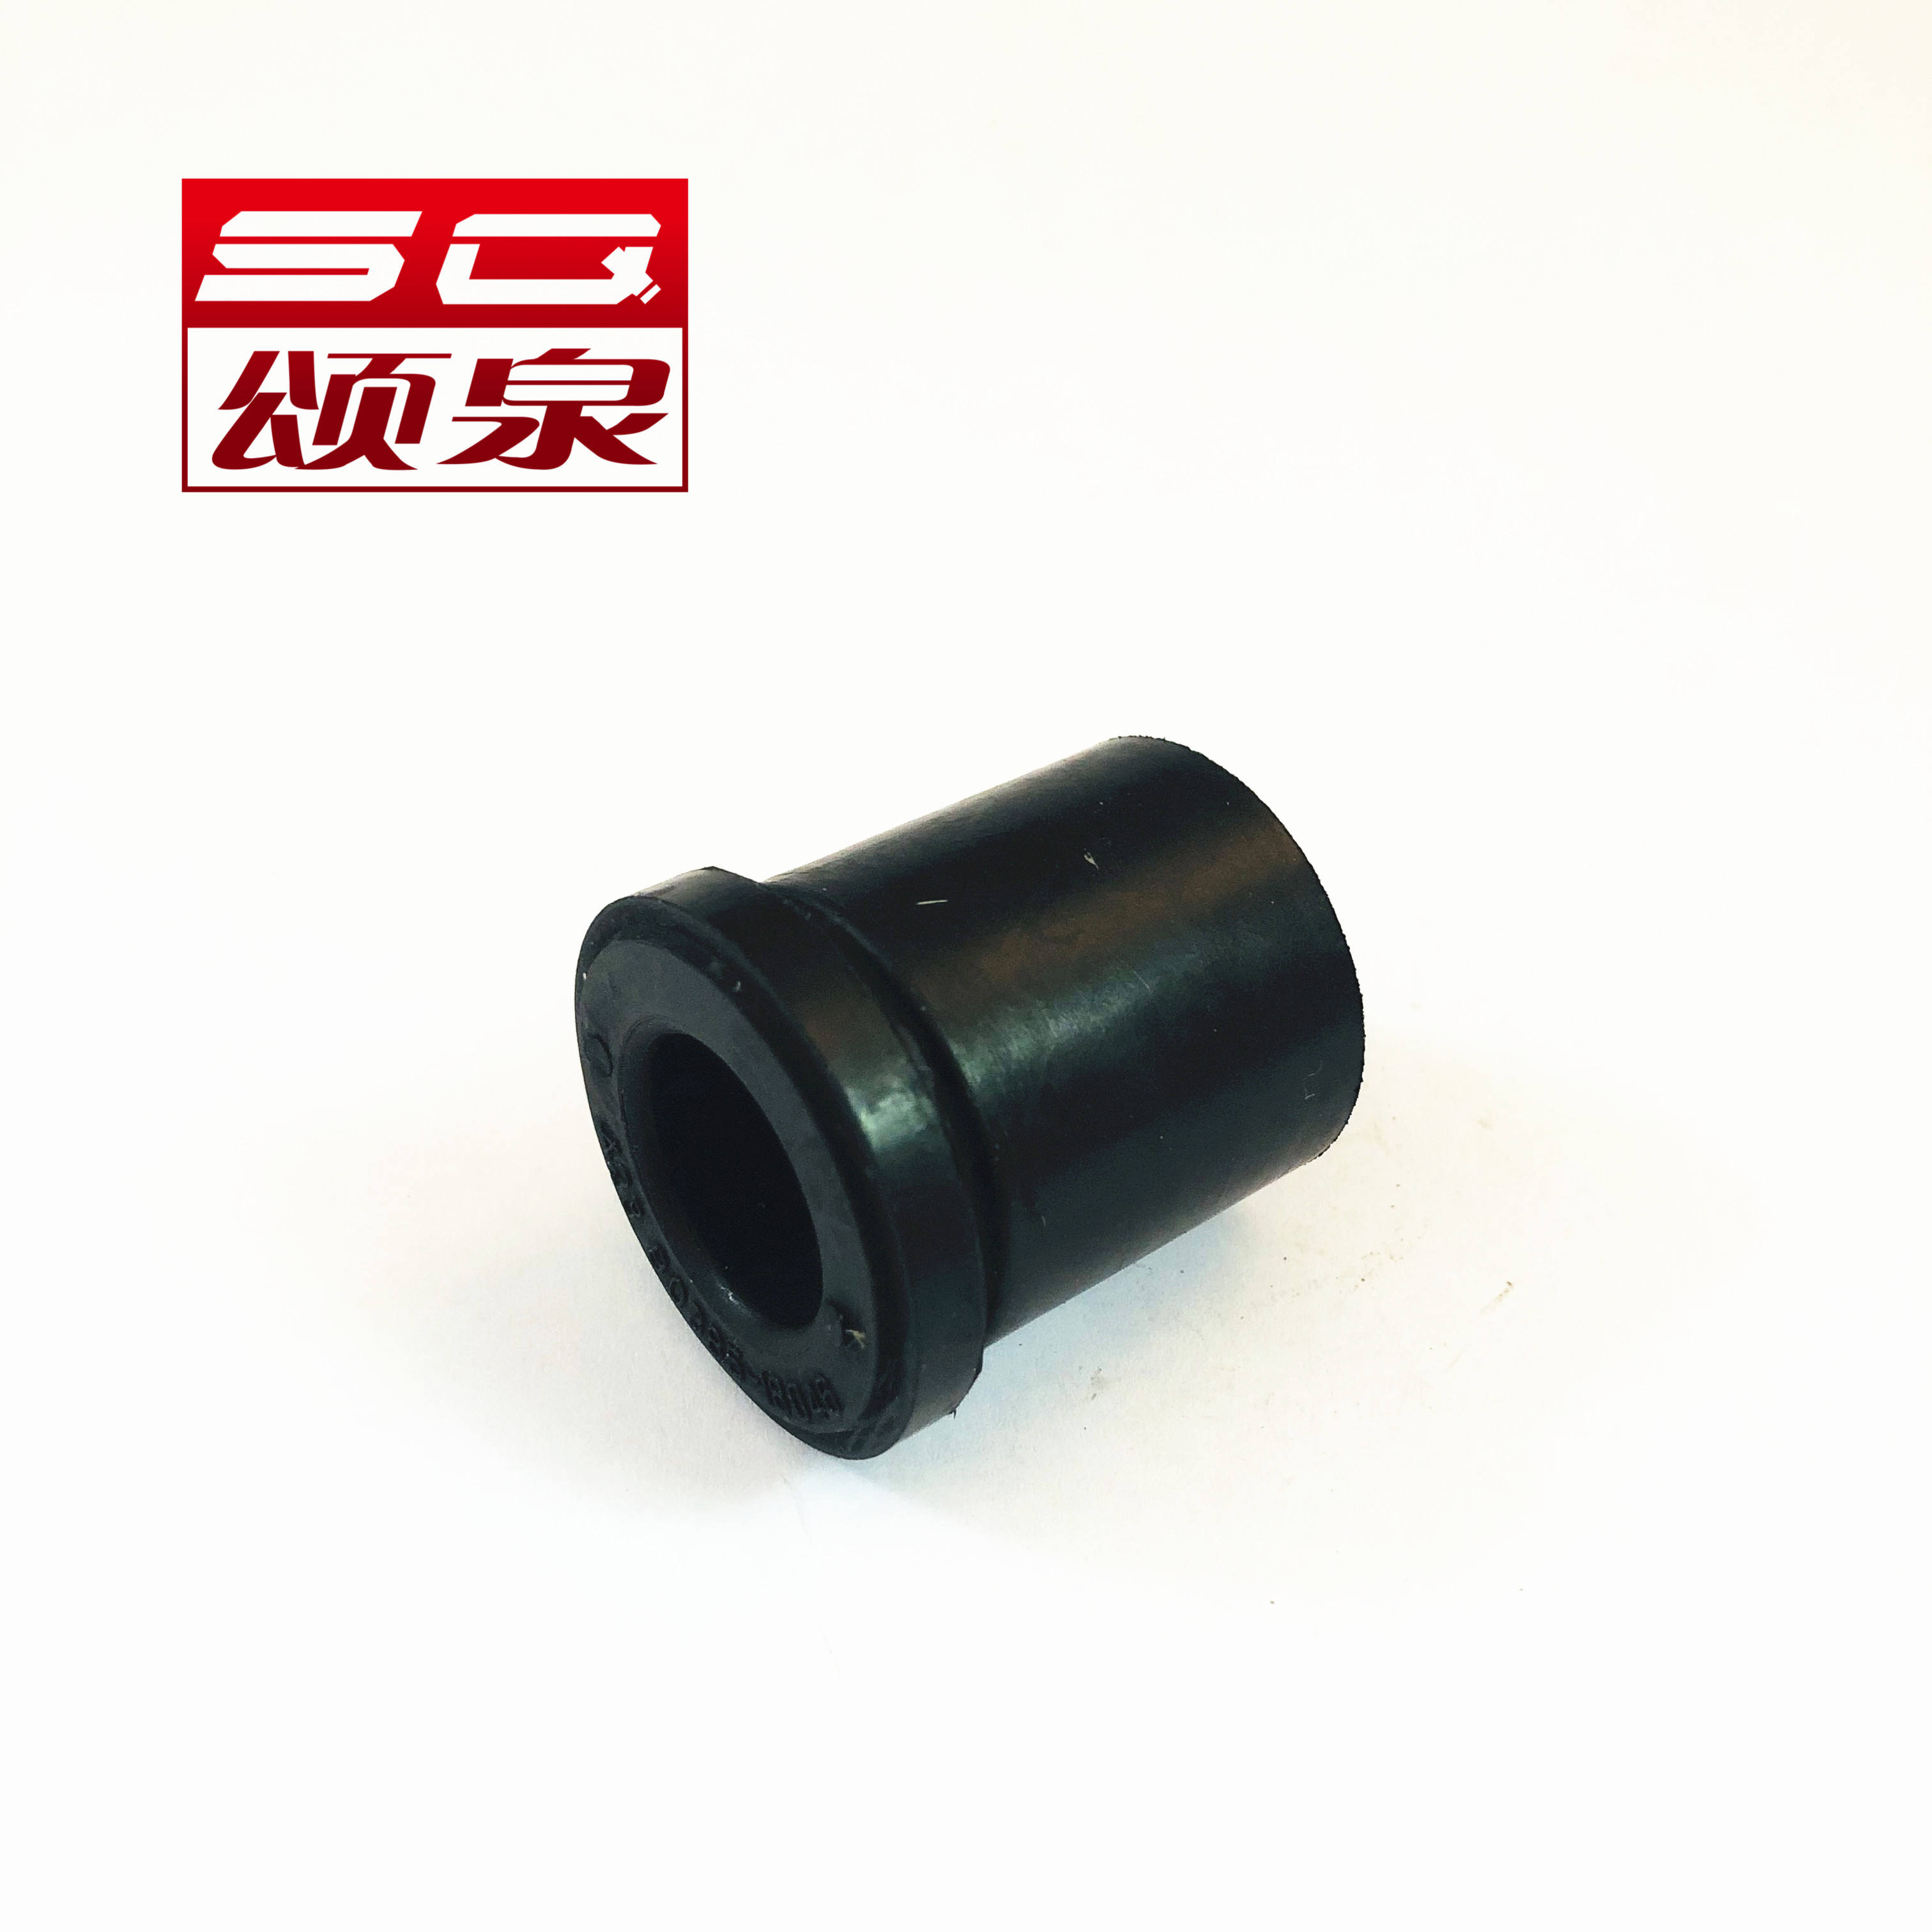 90385-18046 90385-18003 Stabilizer Bushing for Toyota Hilux High Quality Rubber Bushing